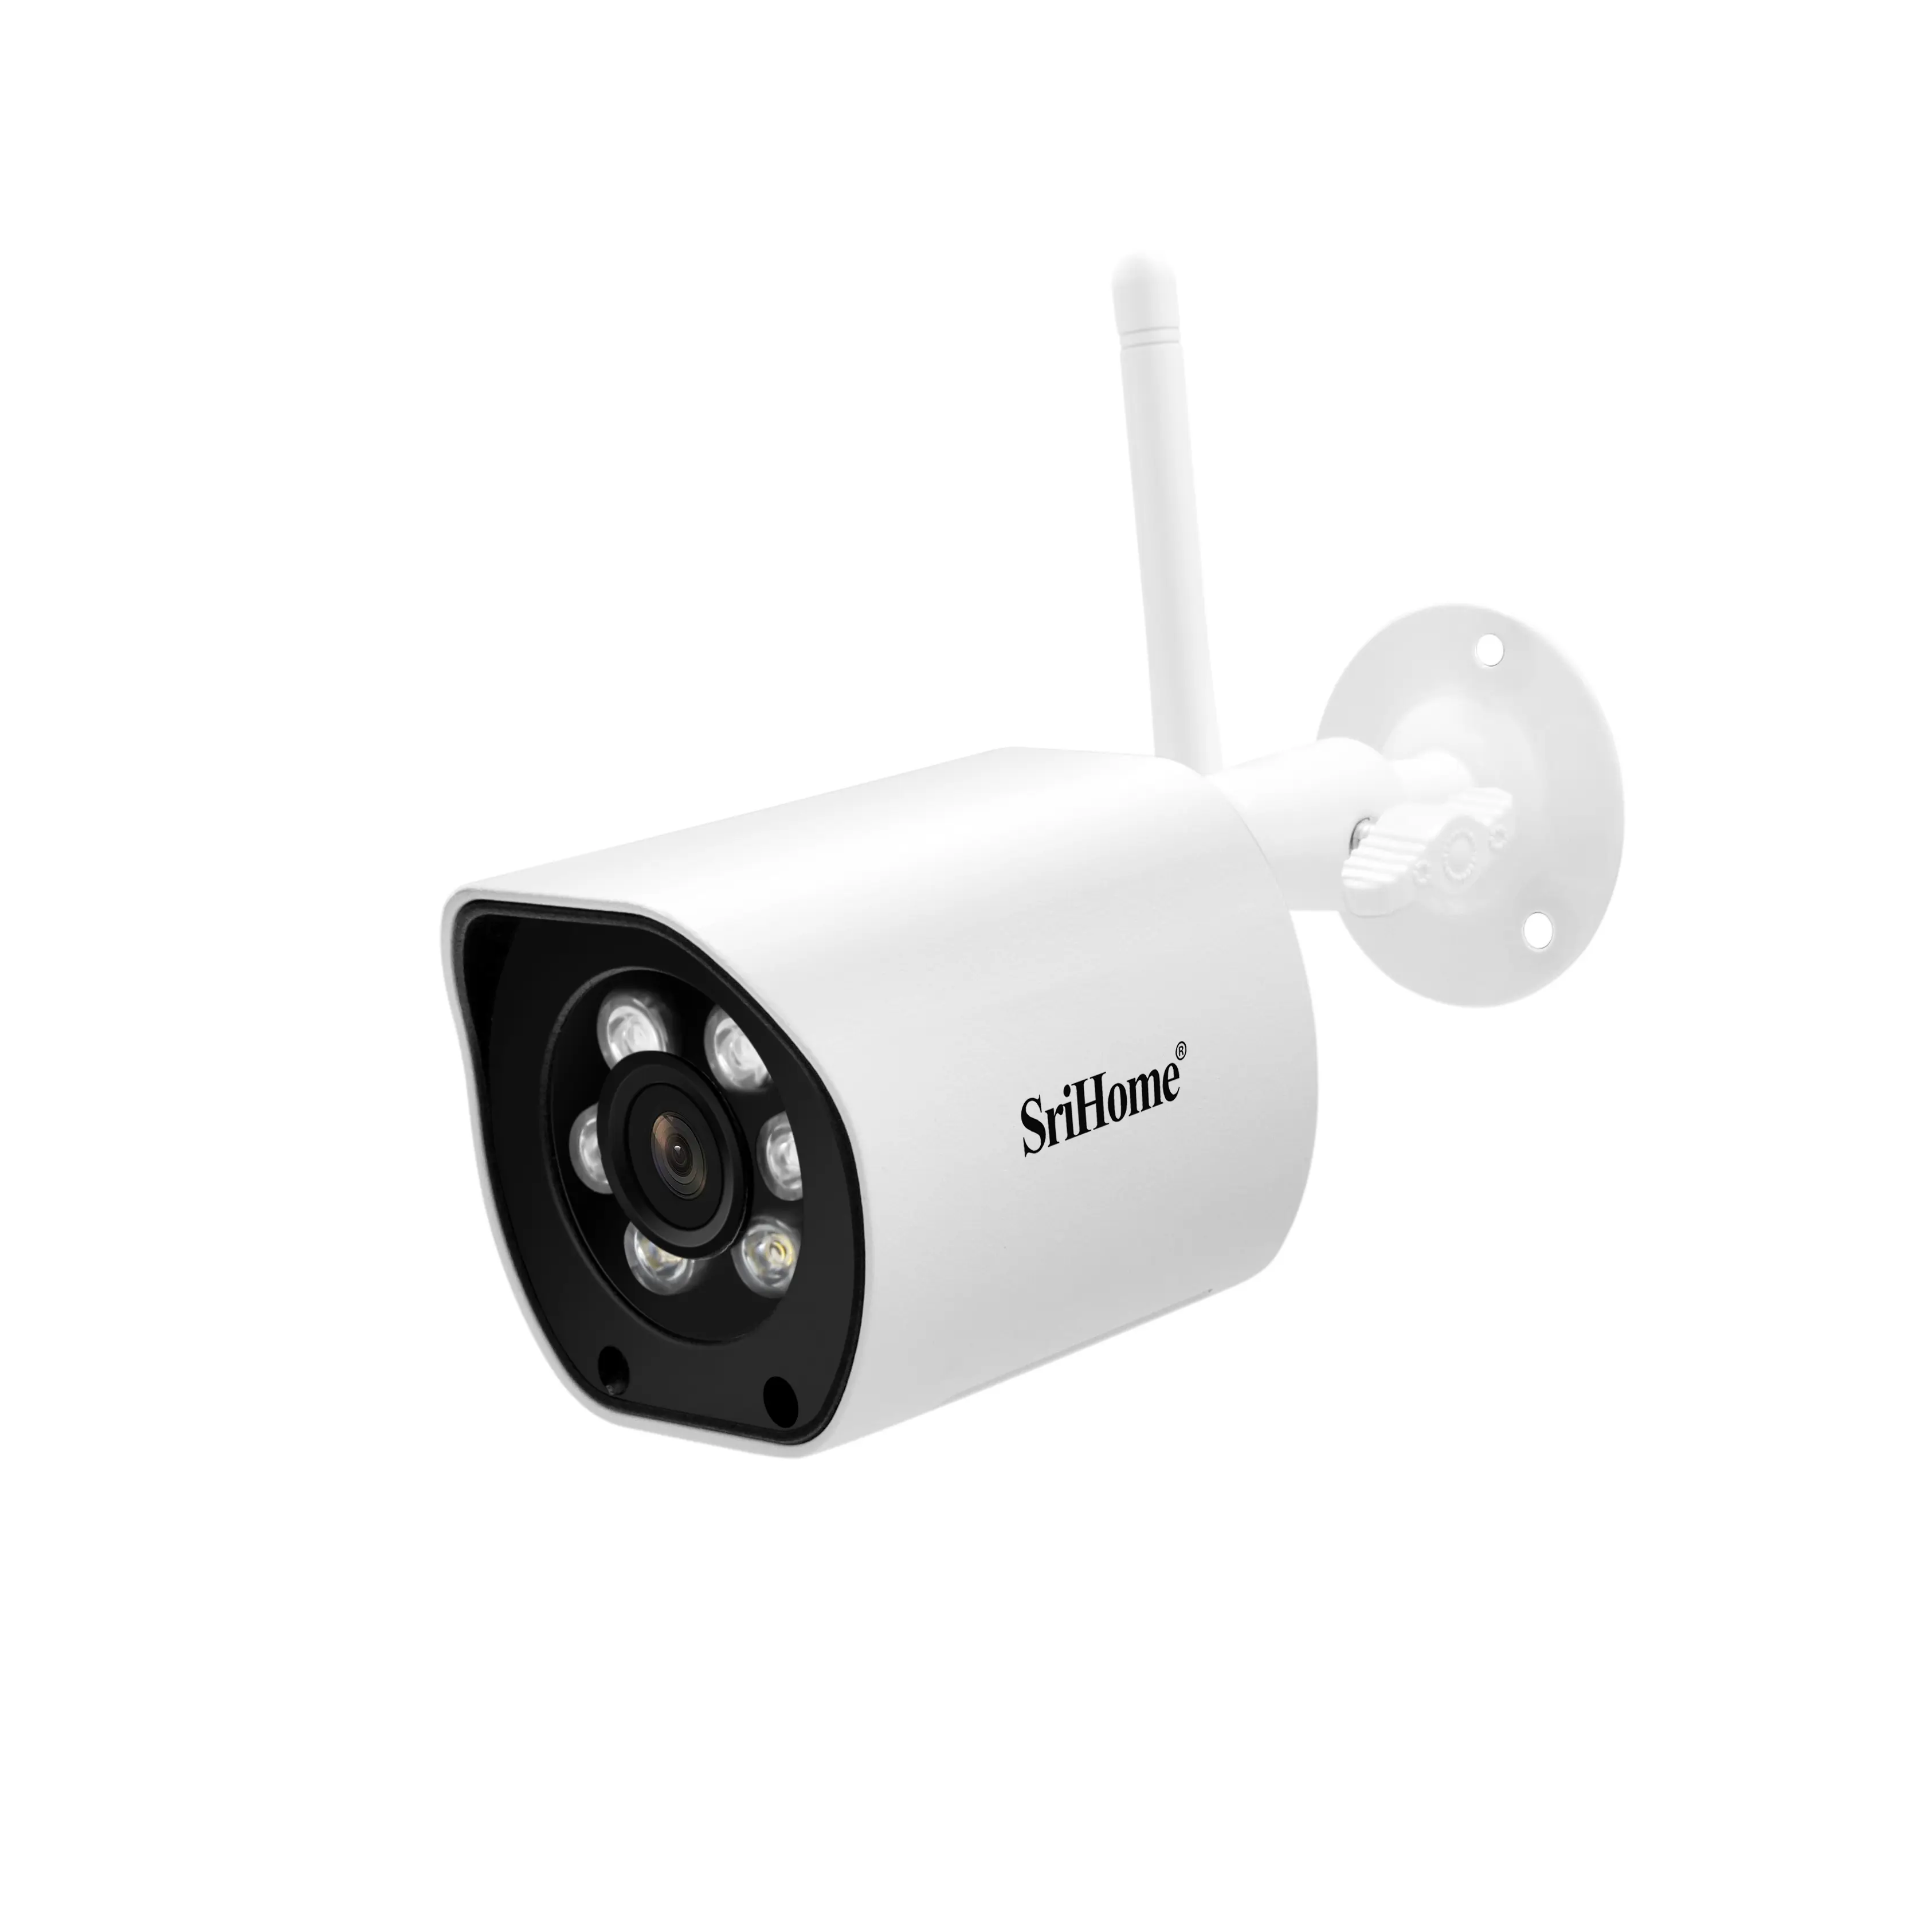 Hot Selling SriHome SH034C Outdoor camera Bullet 4mp Smart Home Security Two Way Audio IP Network Surveillance Cameras